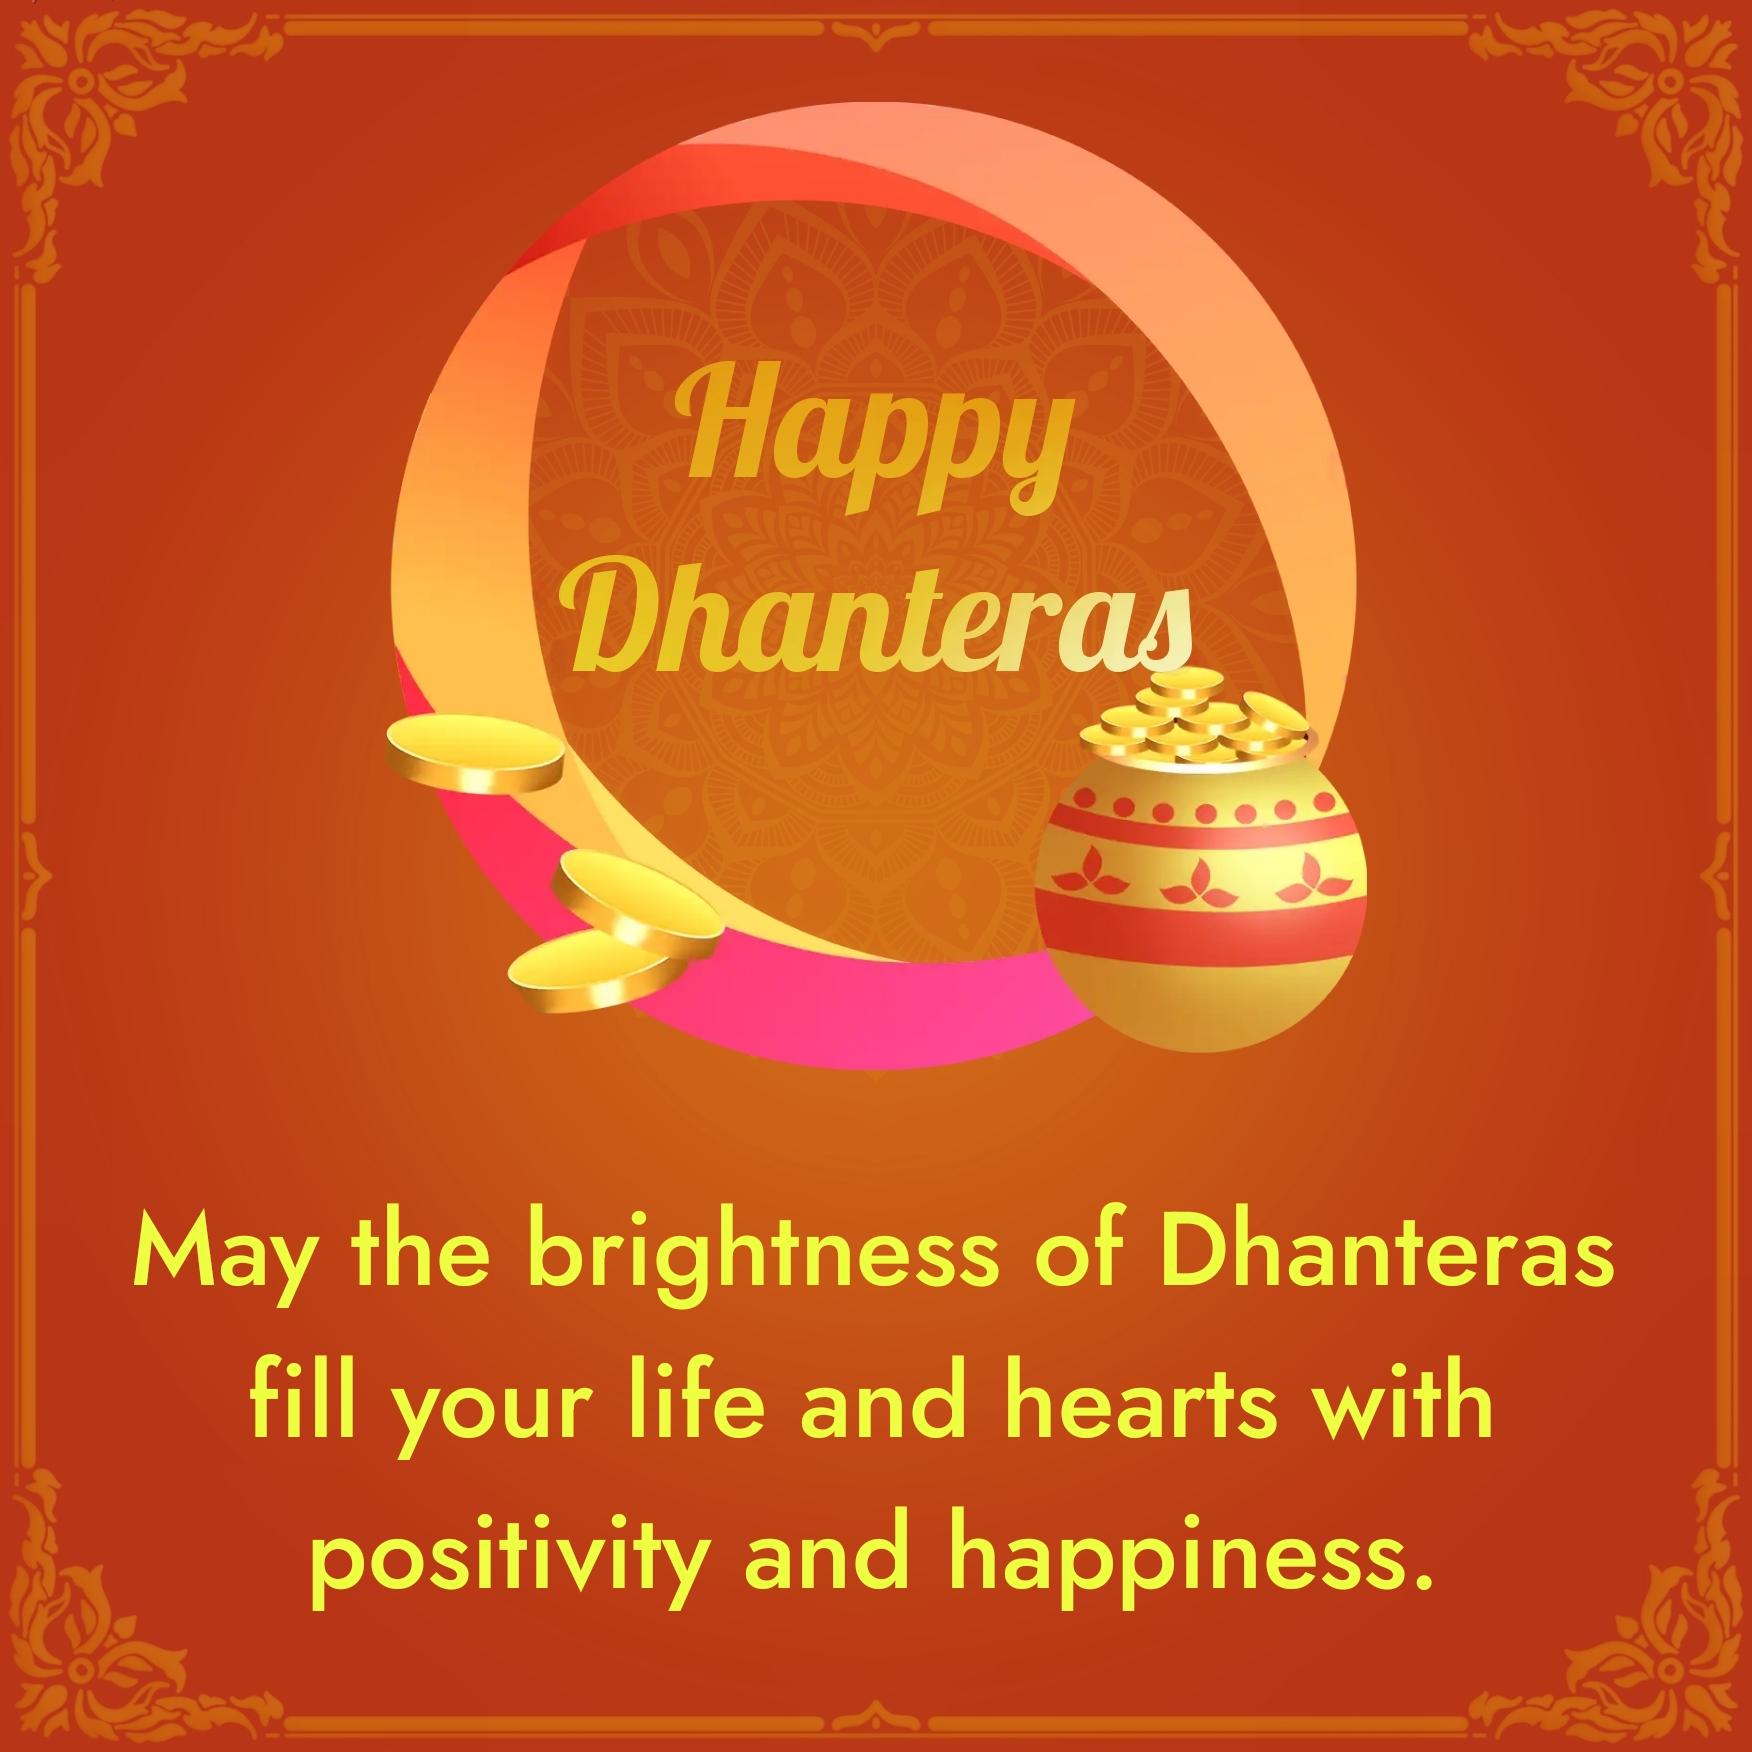 May the brightness of Dhanteras fill your life and hearts